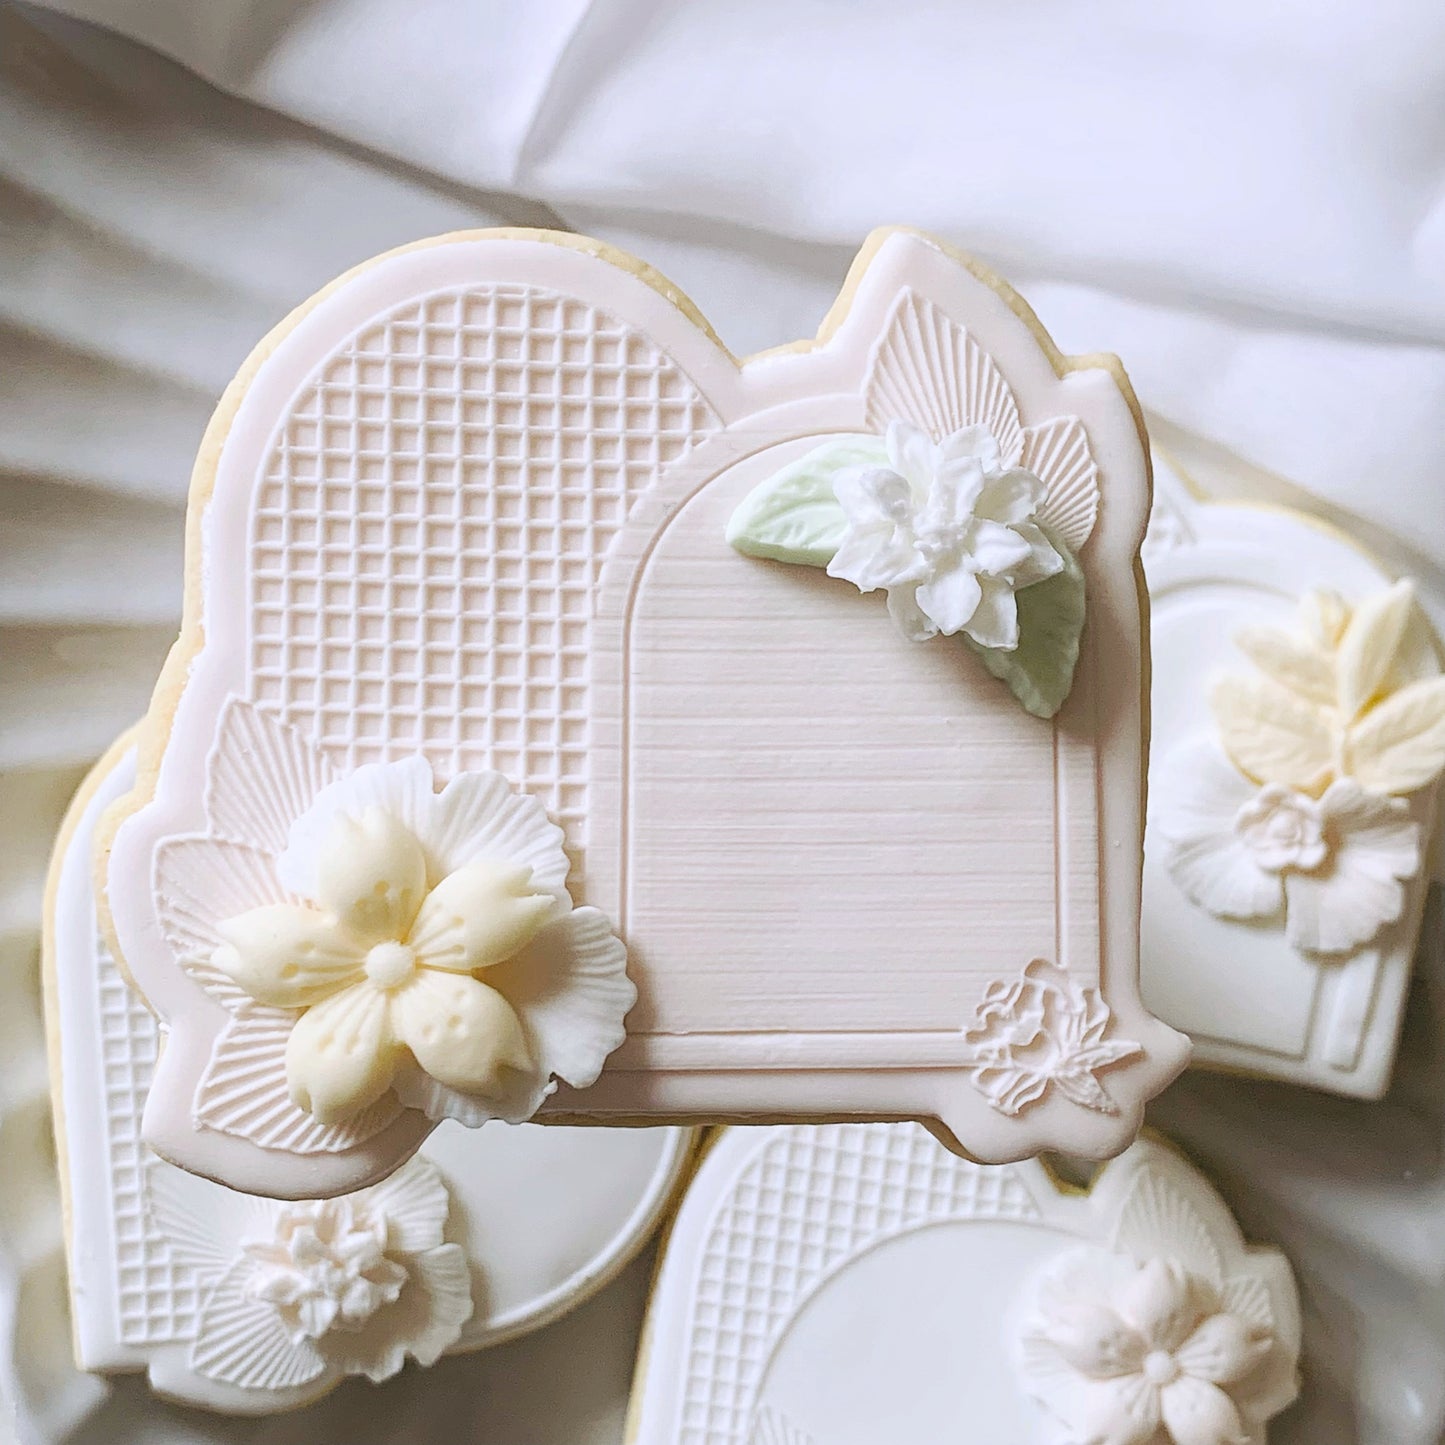 Fan Florals Double Arch Cookie Stamp & Cutter